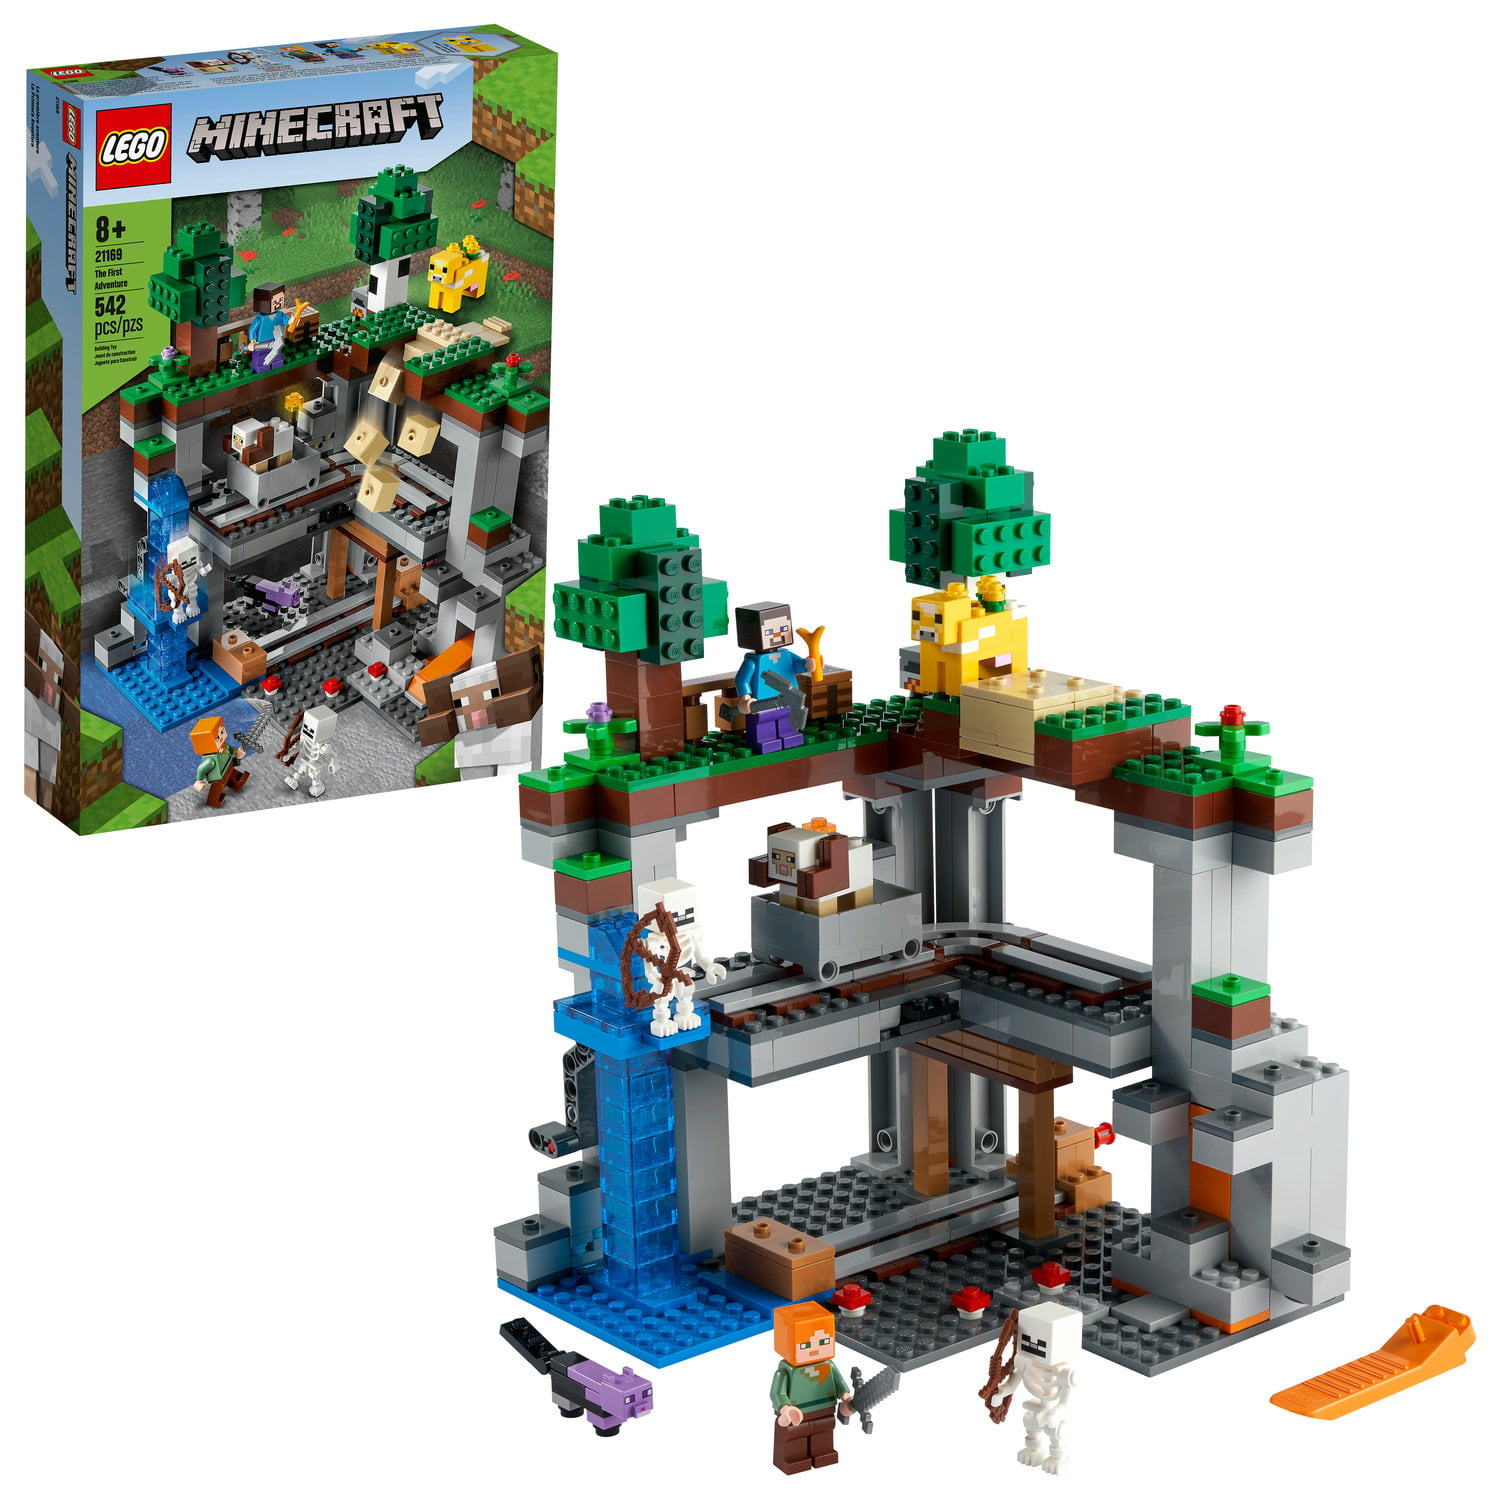 542-Pc LEGO Minecraft The First Adventure 21169 Building Set $48.00